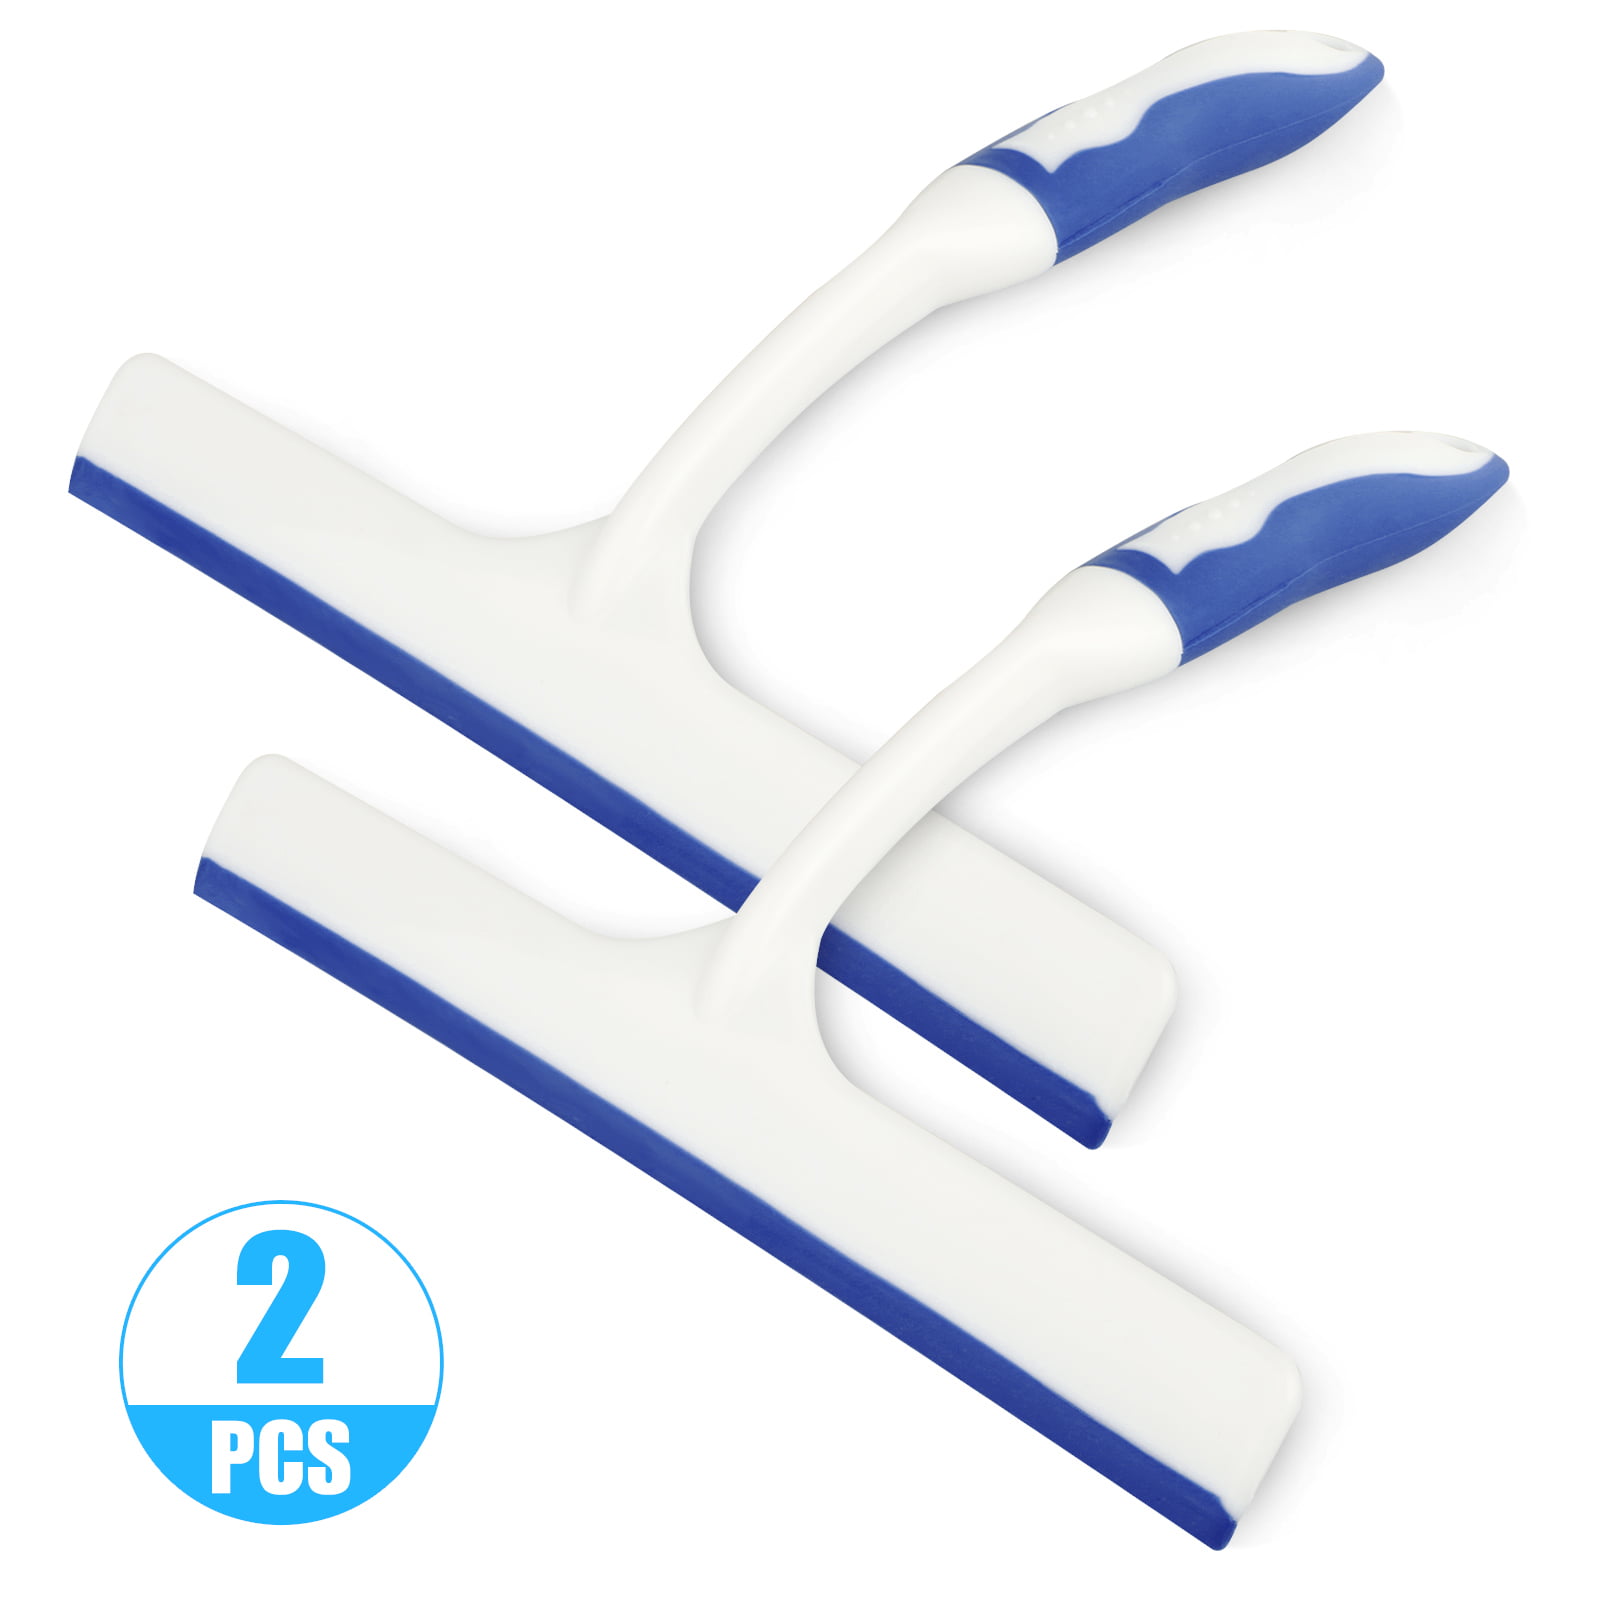 Kitchen and Car-Blue Handle NEW POWER Window Squeegees,Rubber Glass Wiper Blades for Bath